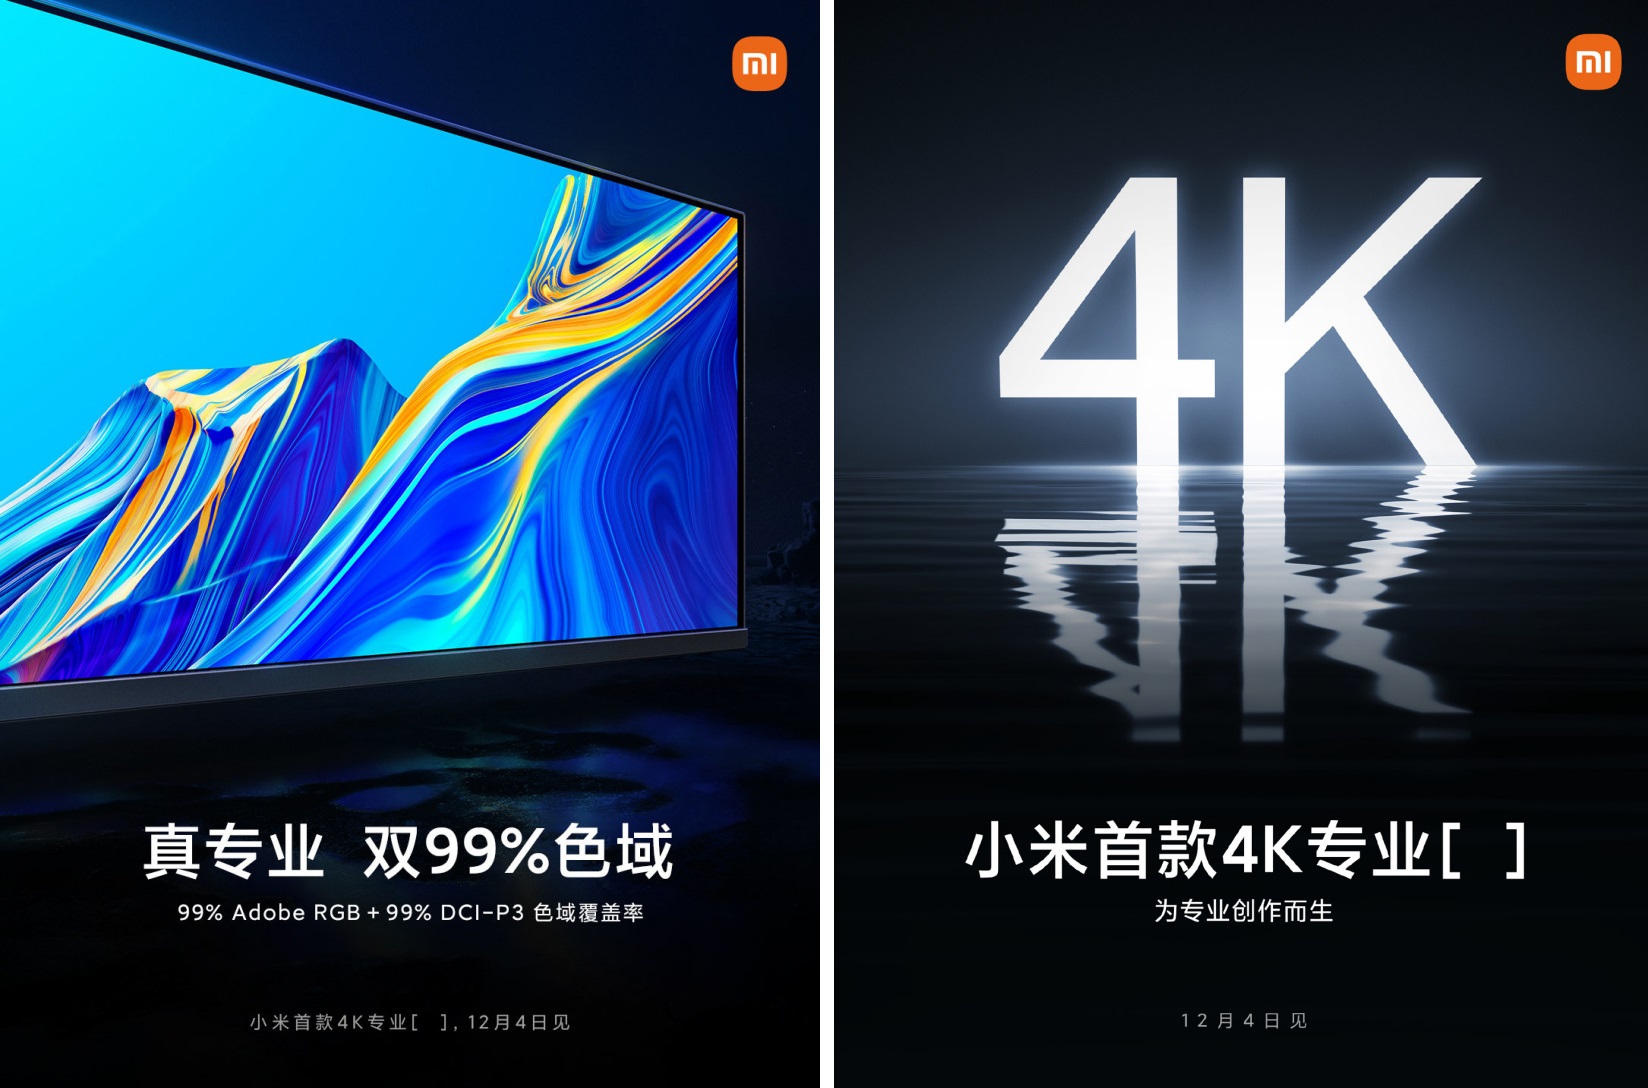 Xiaomi has announced a 4K monitor for editing and working with graphics